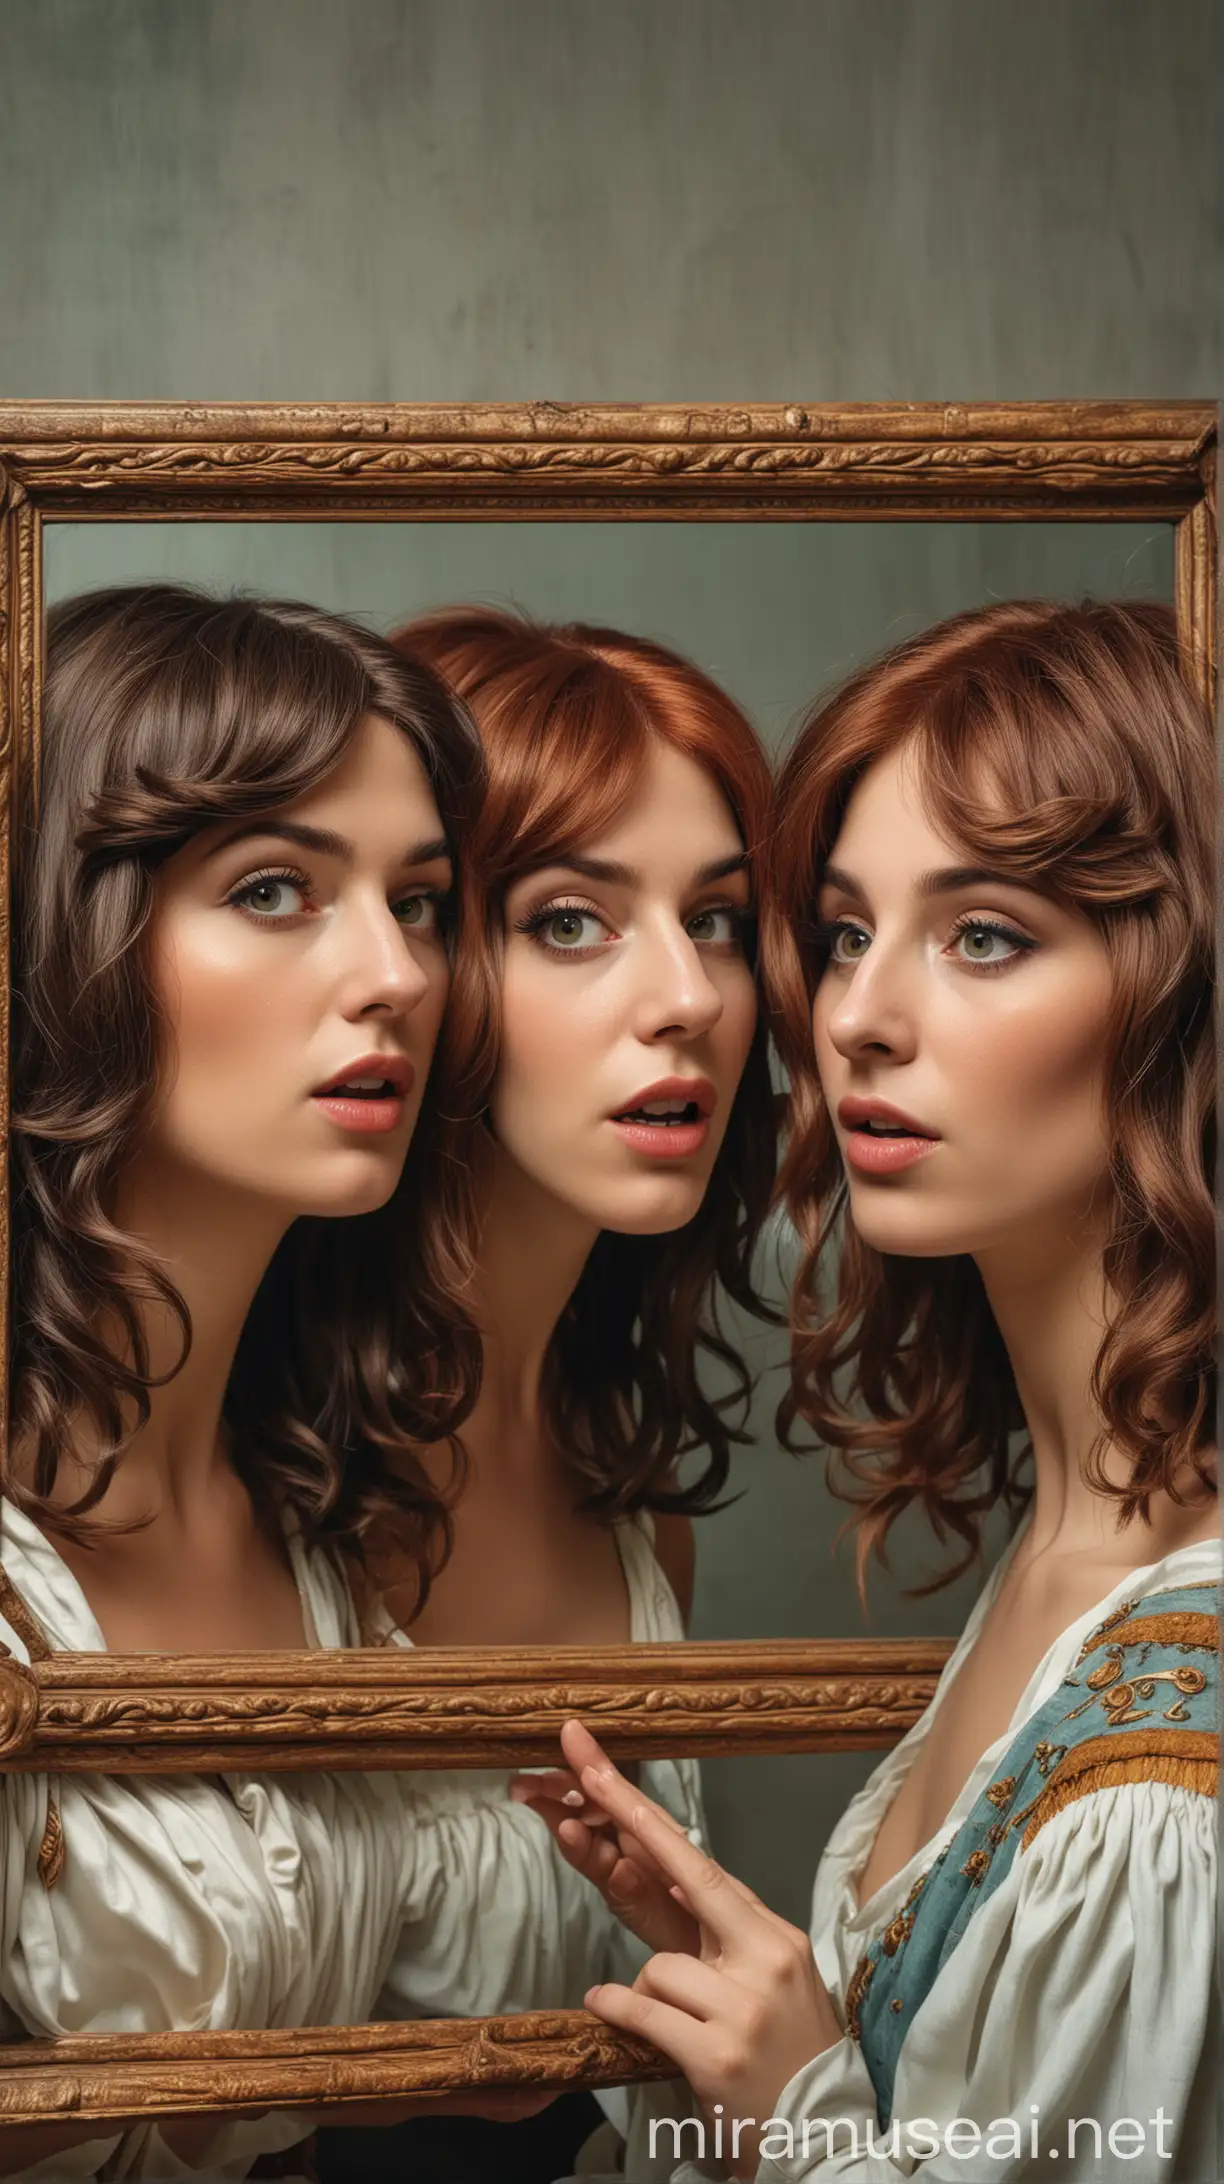 An illustration of Roman women admiring themselves in mirrors while wearing wigs made from Gallic hair, with envy evident in their expressions. hyper realistic